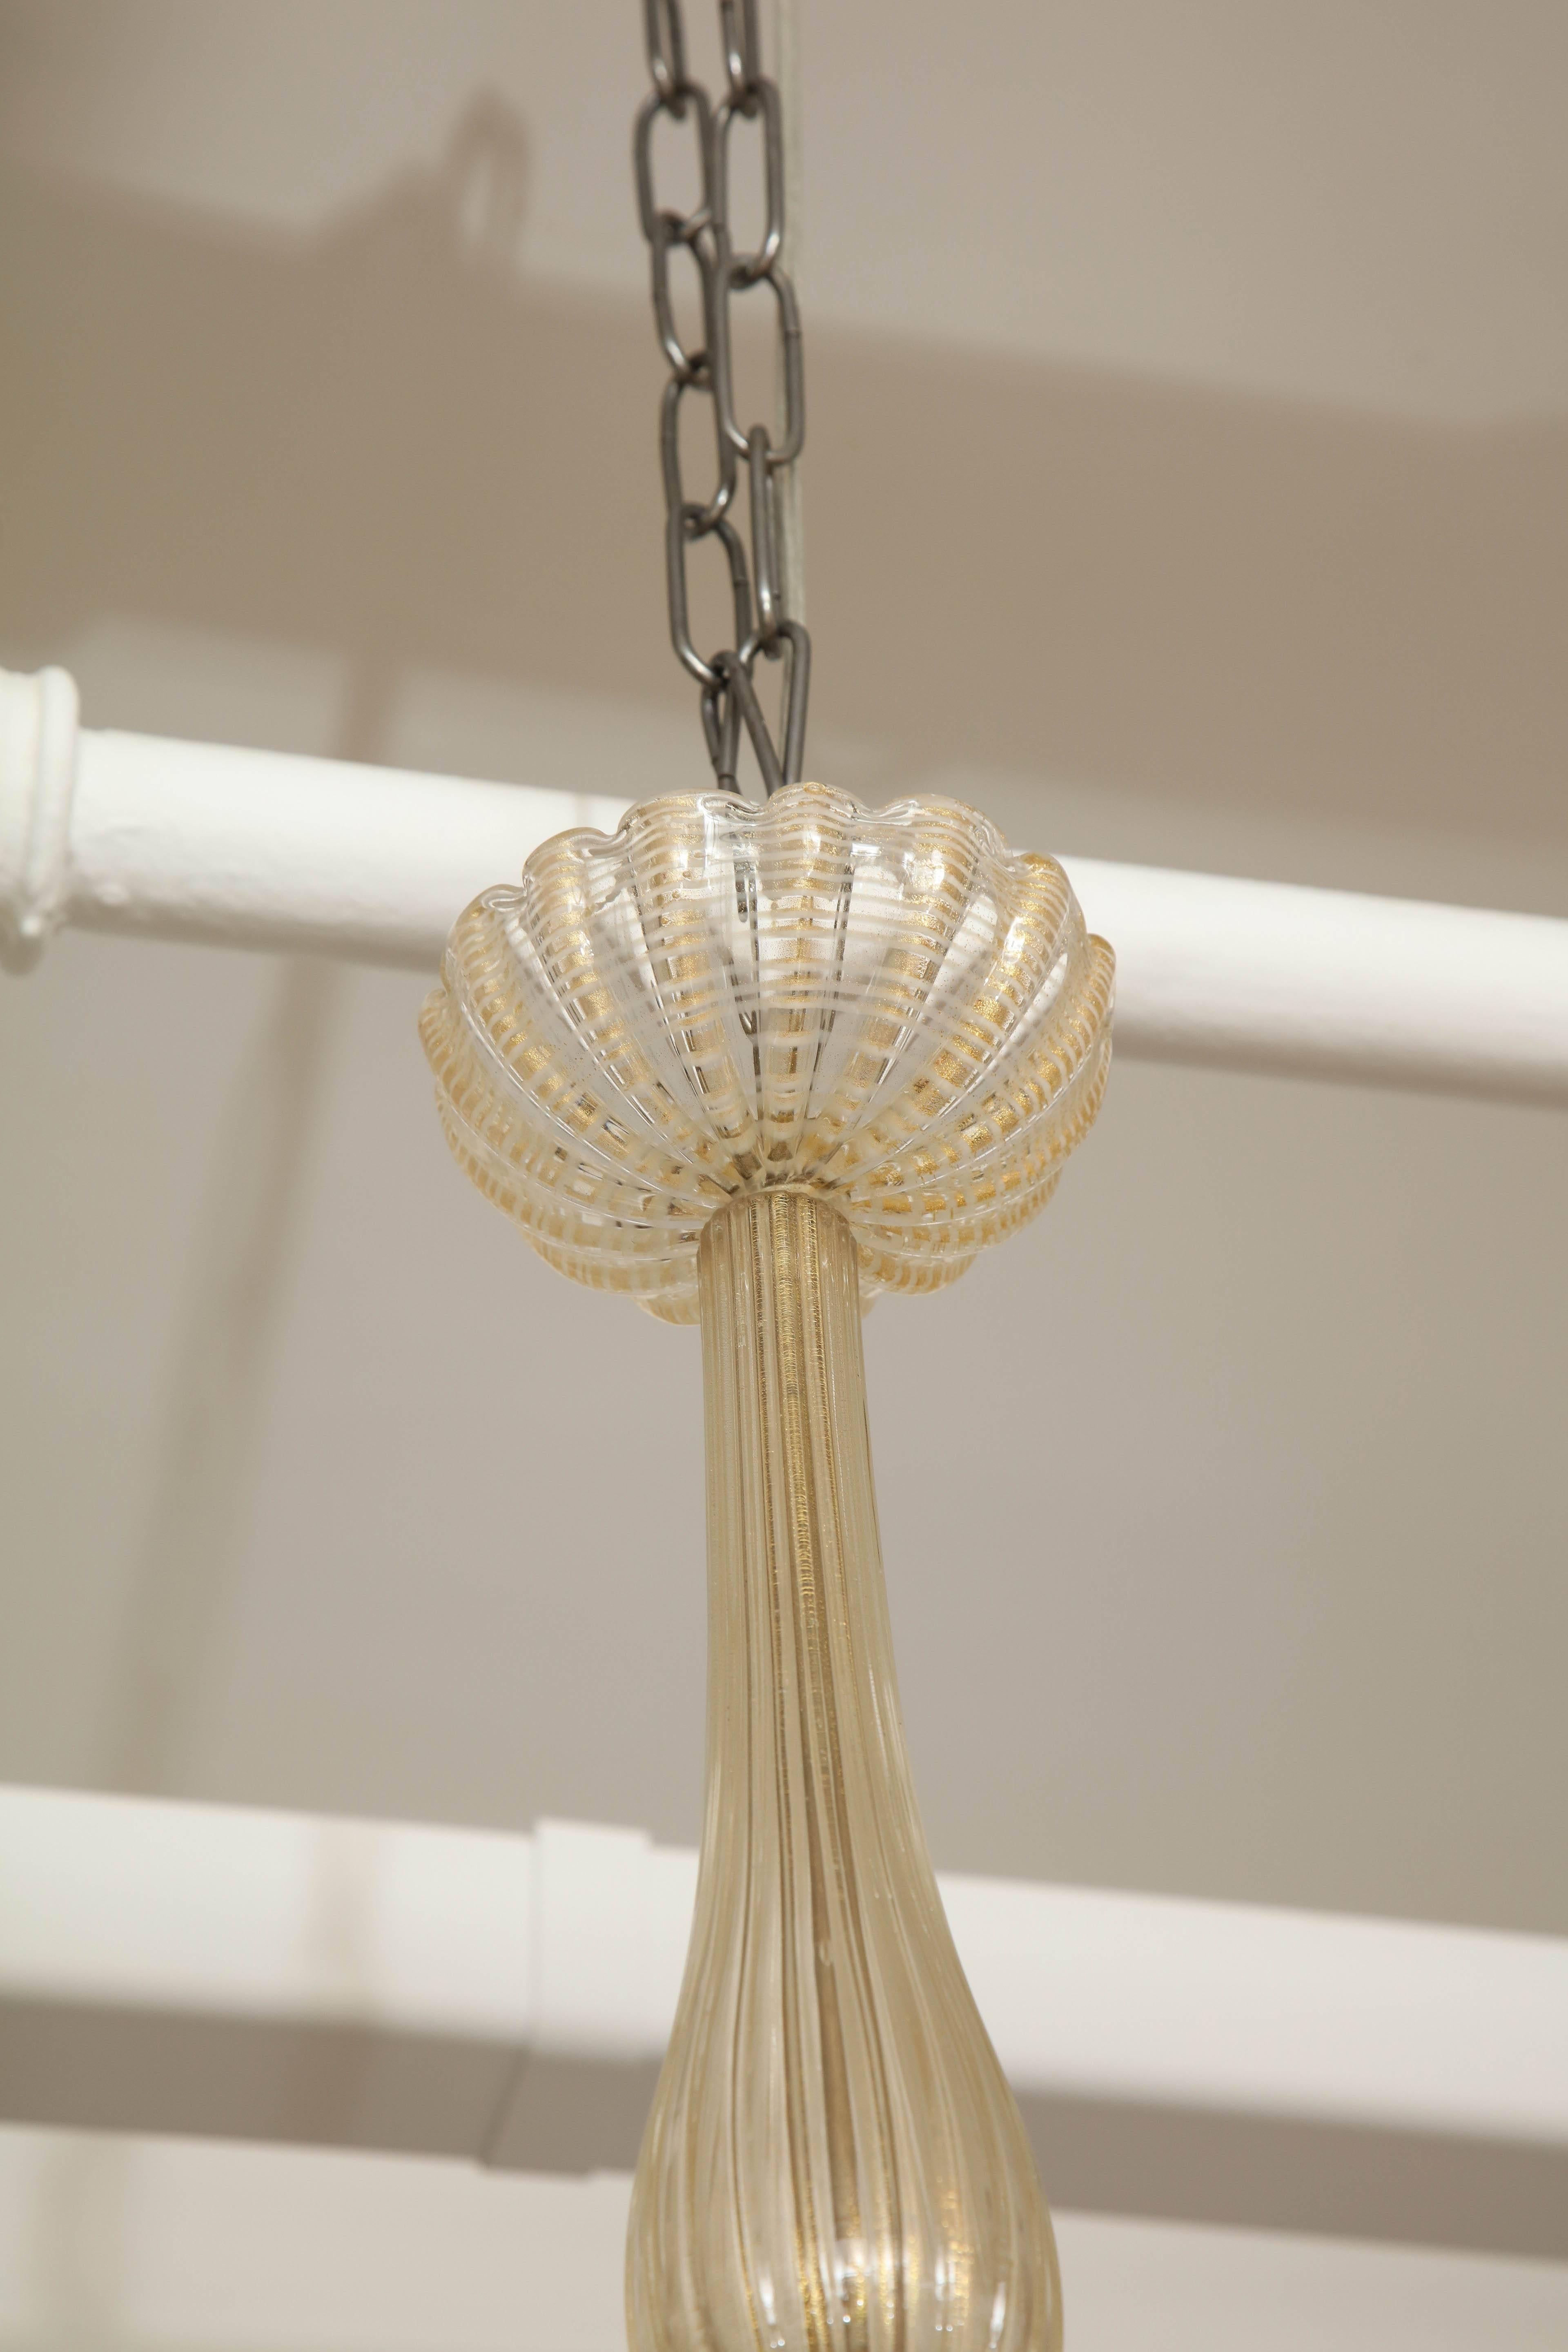 Barovier & Toso Chandelier Made in Venice, 1935 In Excellent Condition For Sale In New York, NY